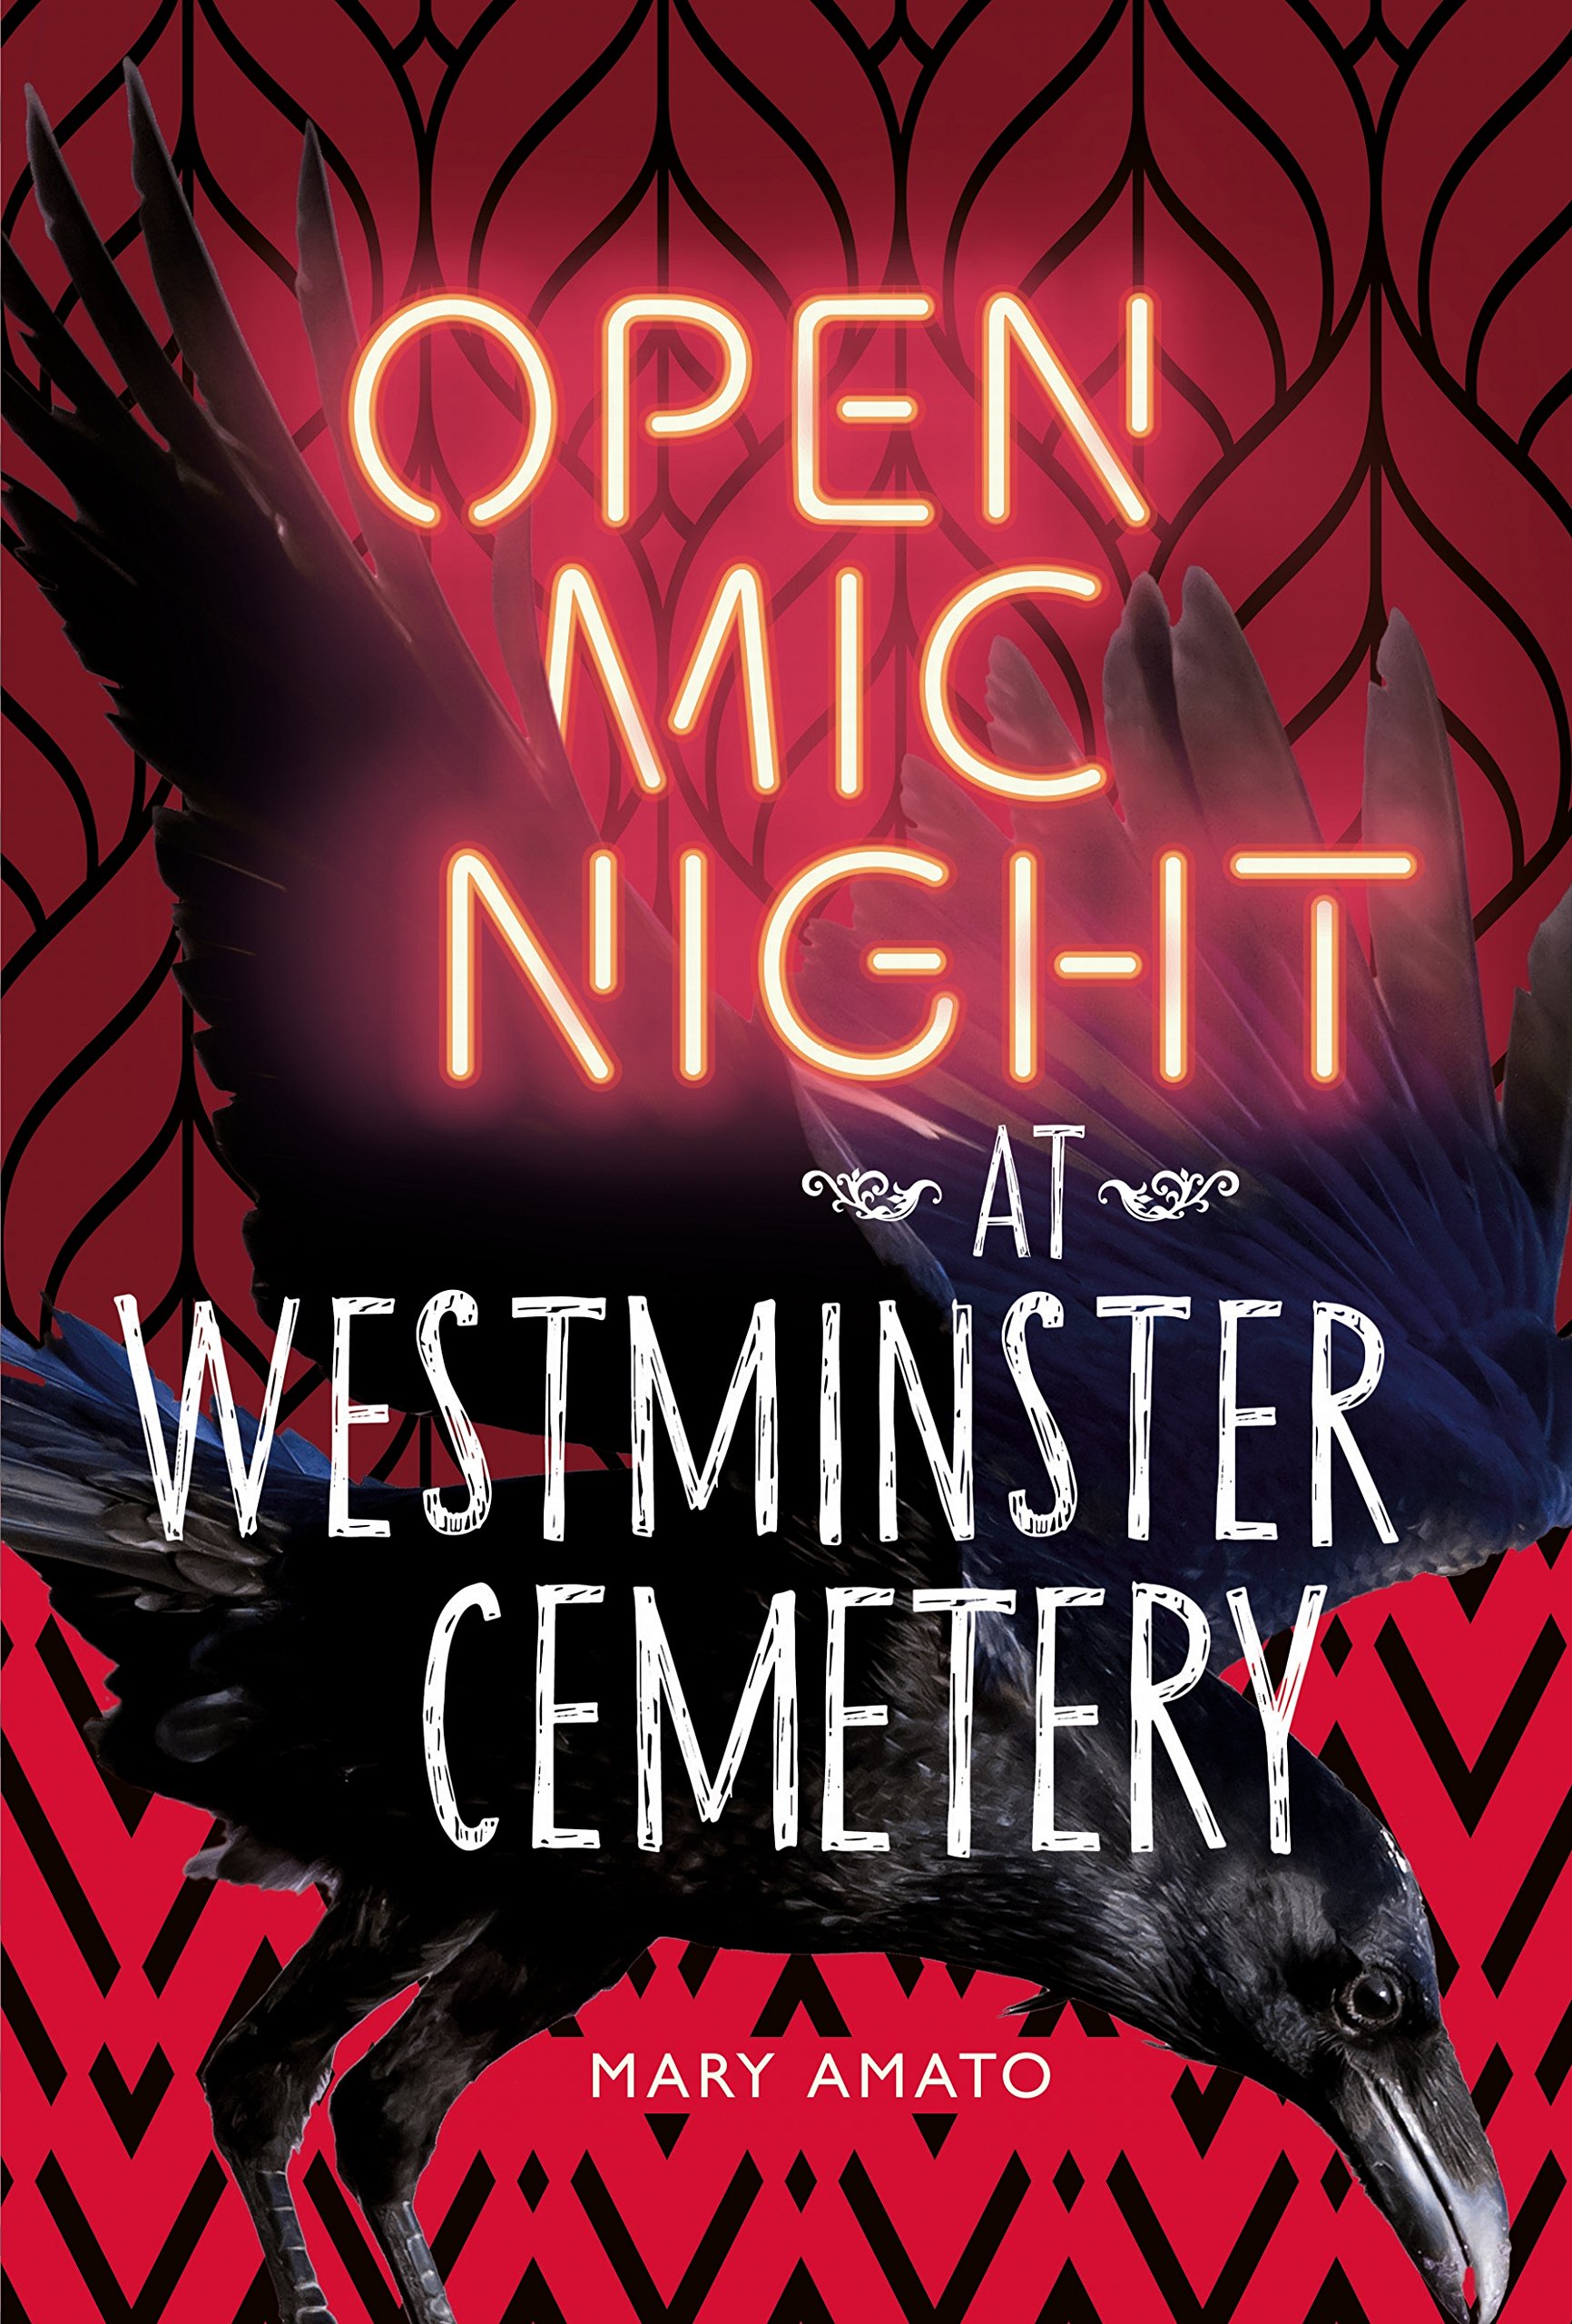 open mic night at westminster cemetary by mary amato book cover